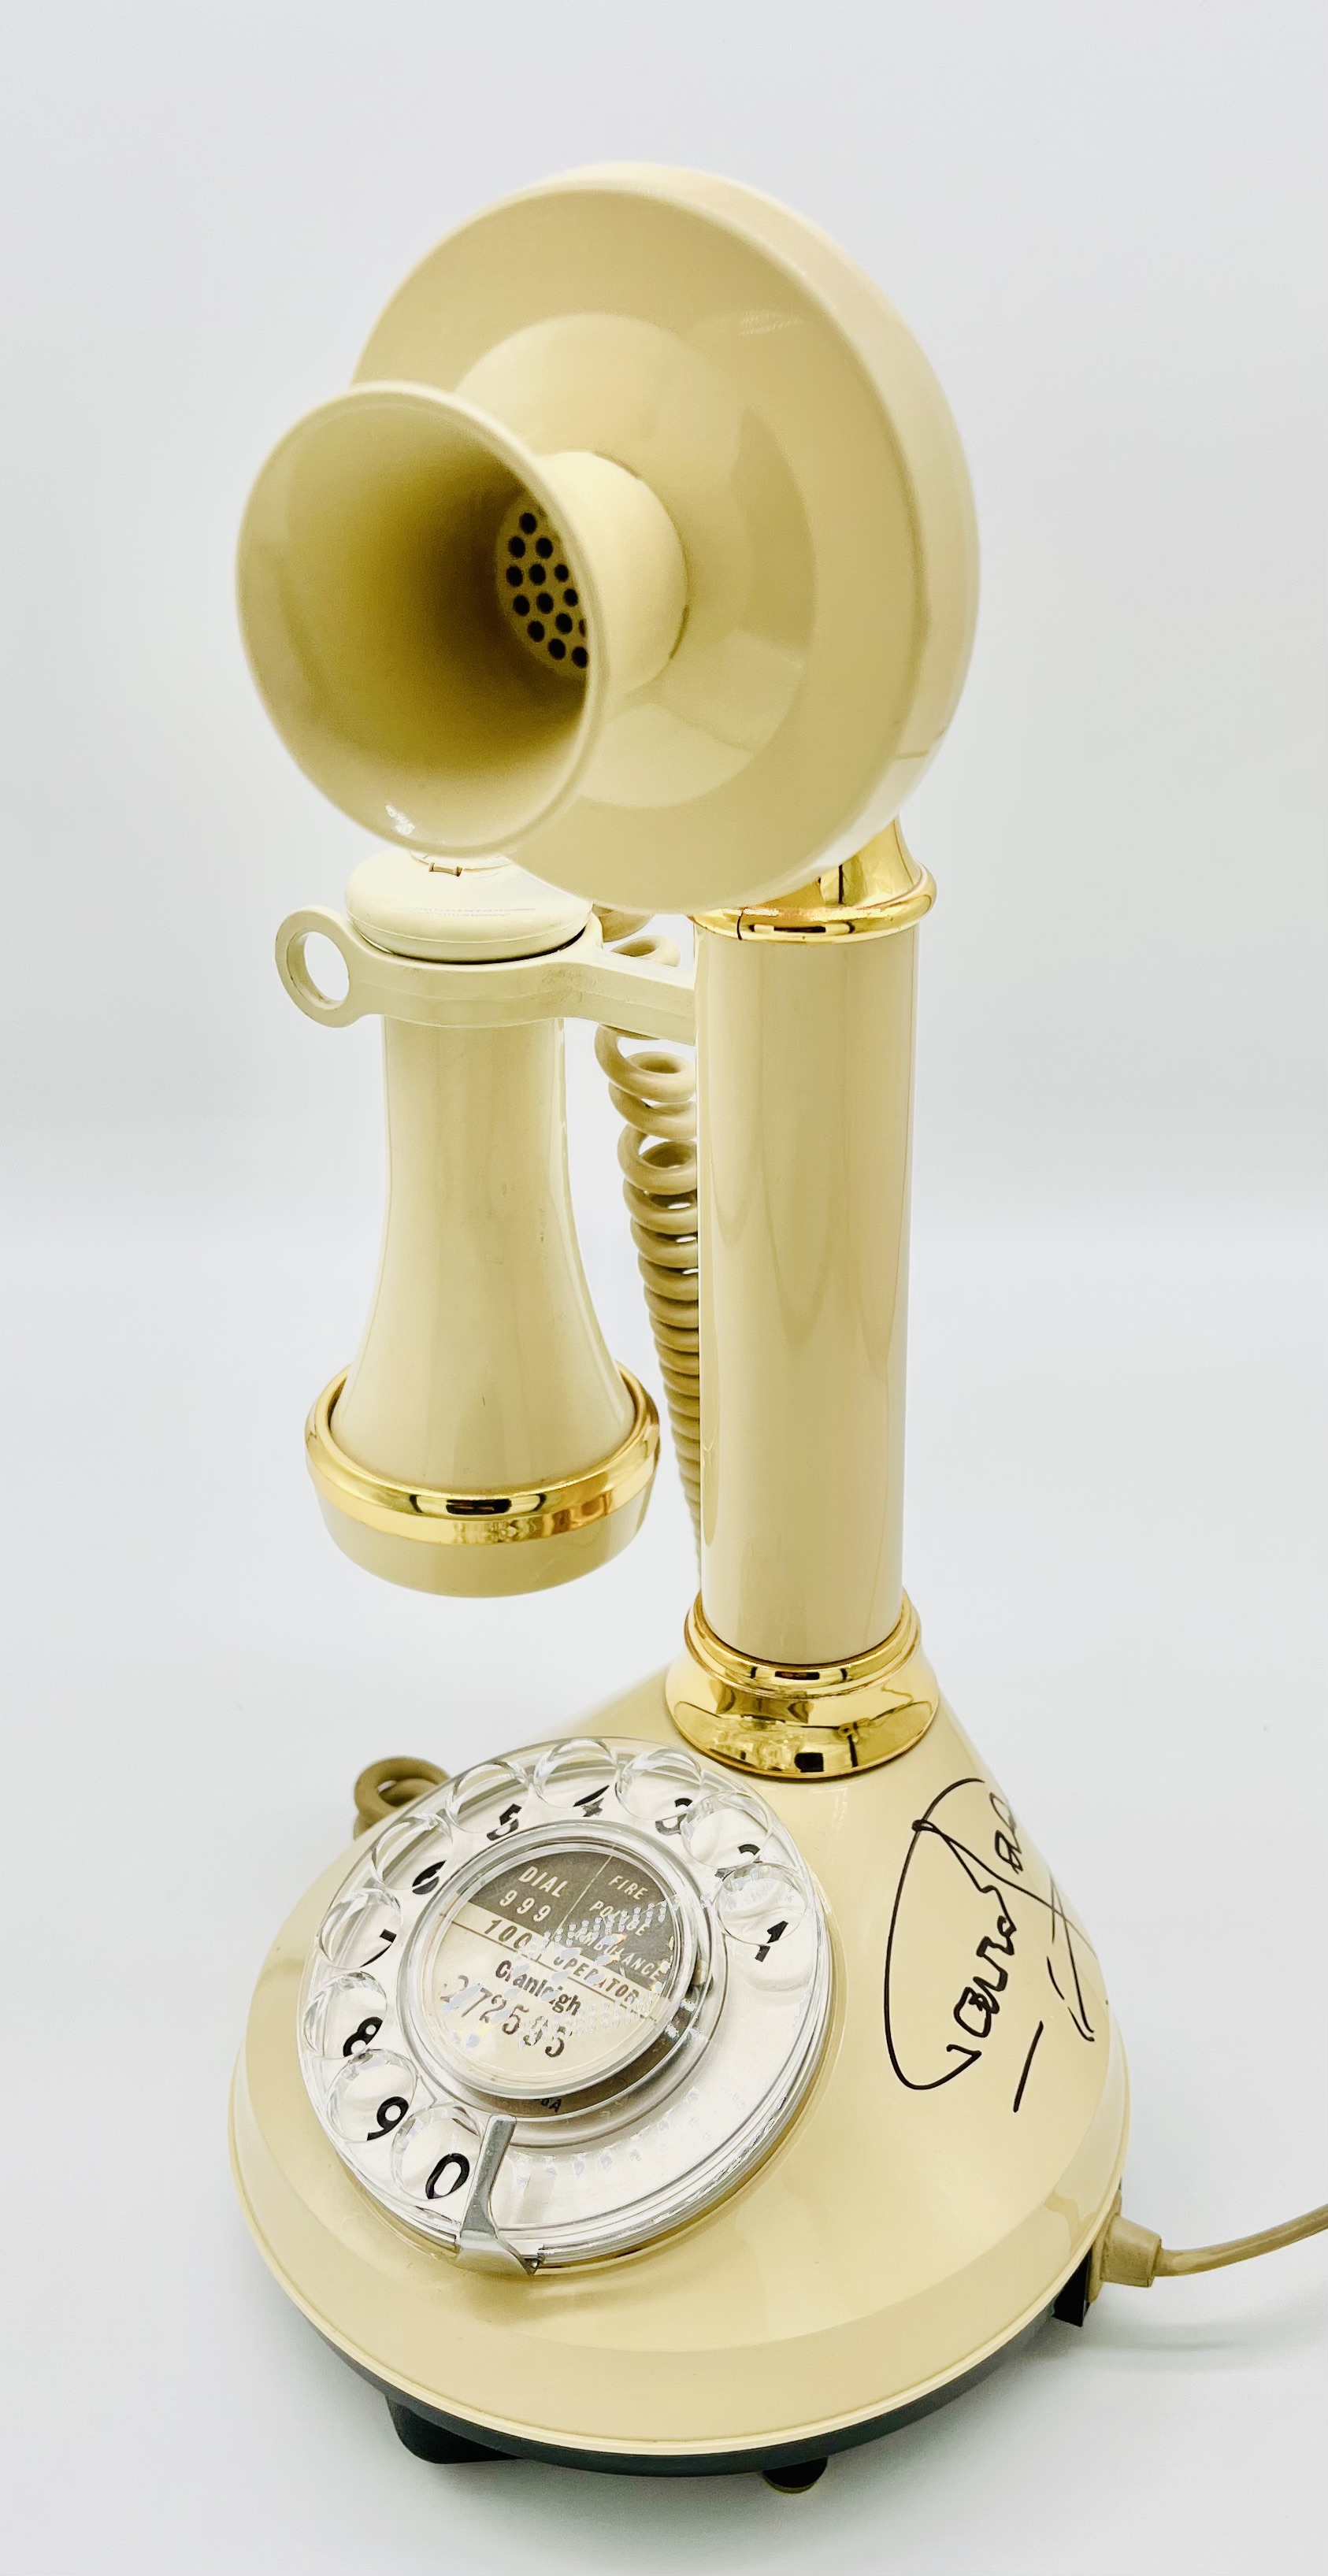 ONLY FOOLS & HORSES - DEL BOY'S CANDLESTICK TELEPHONE - Image 3 of 6